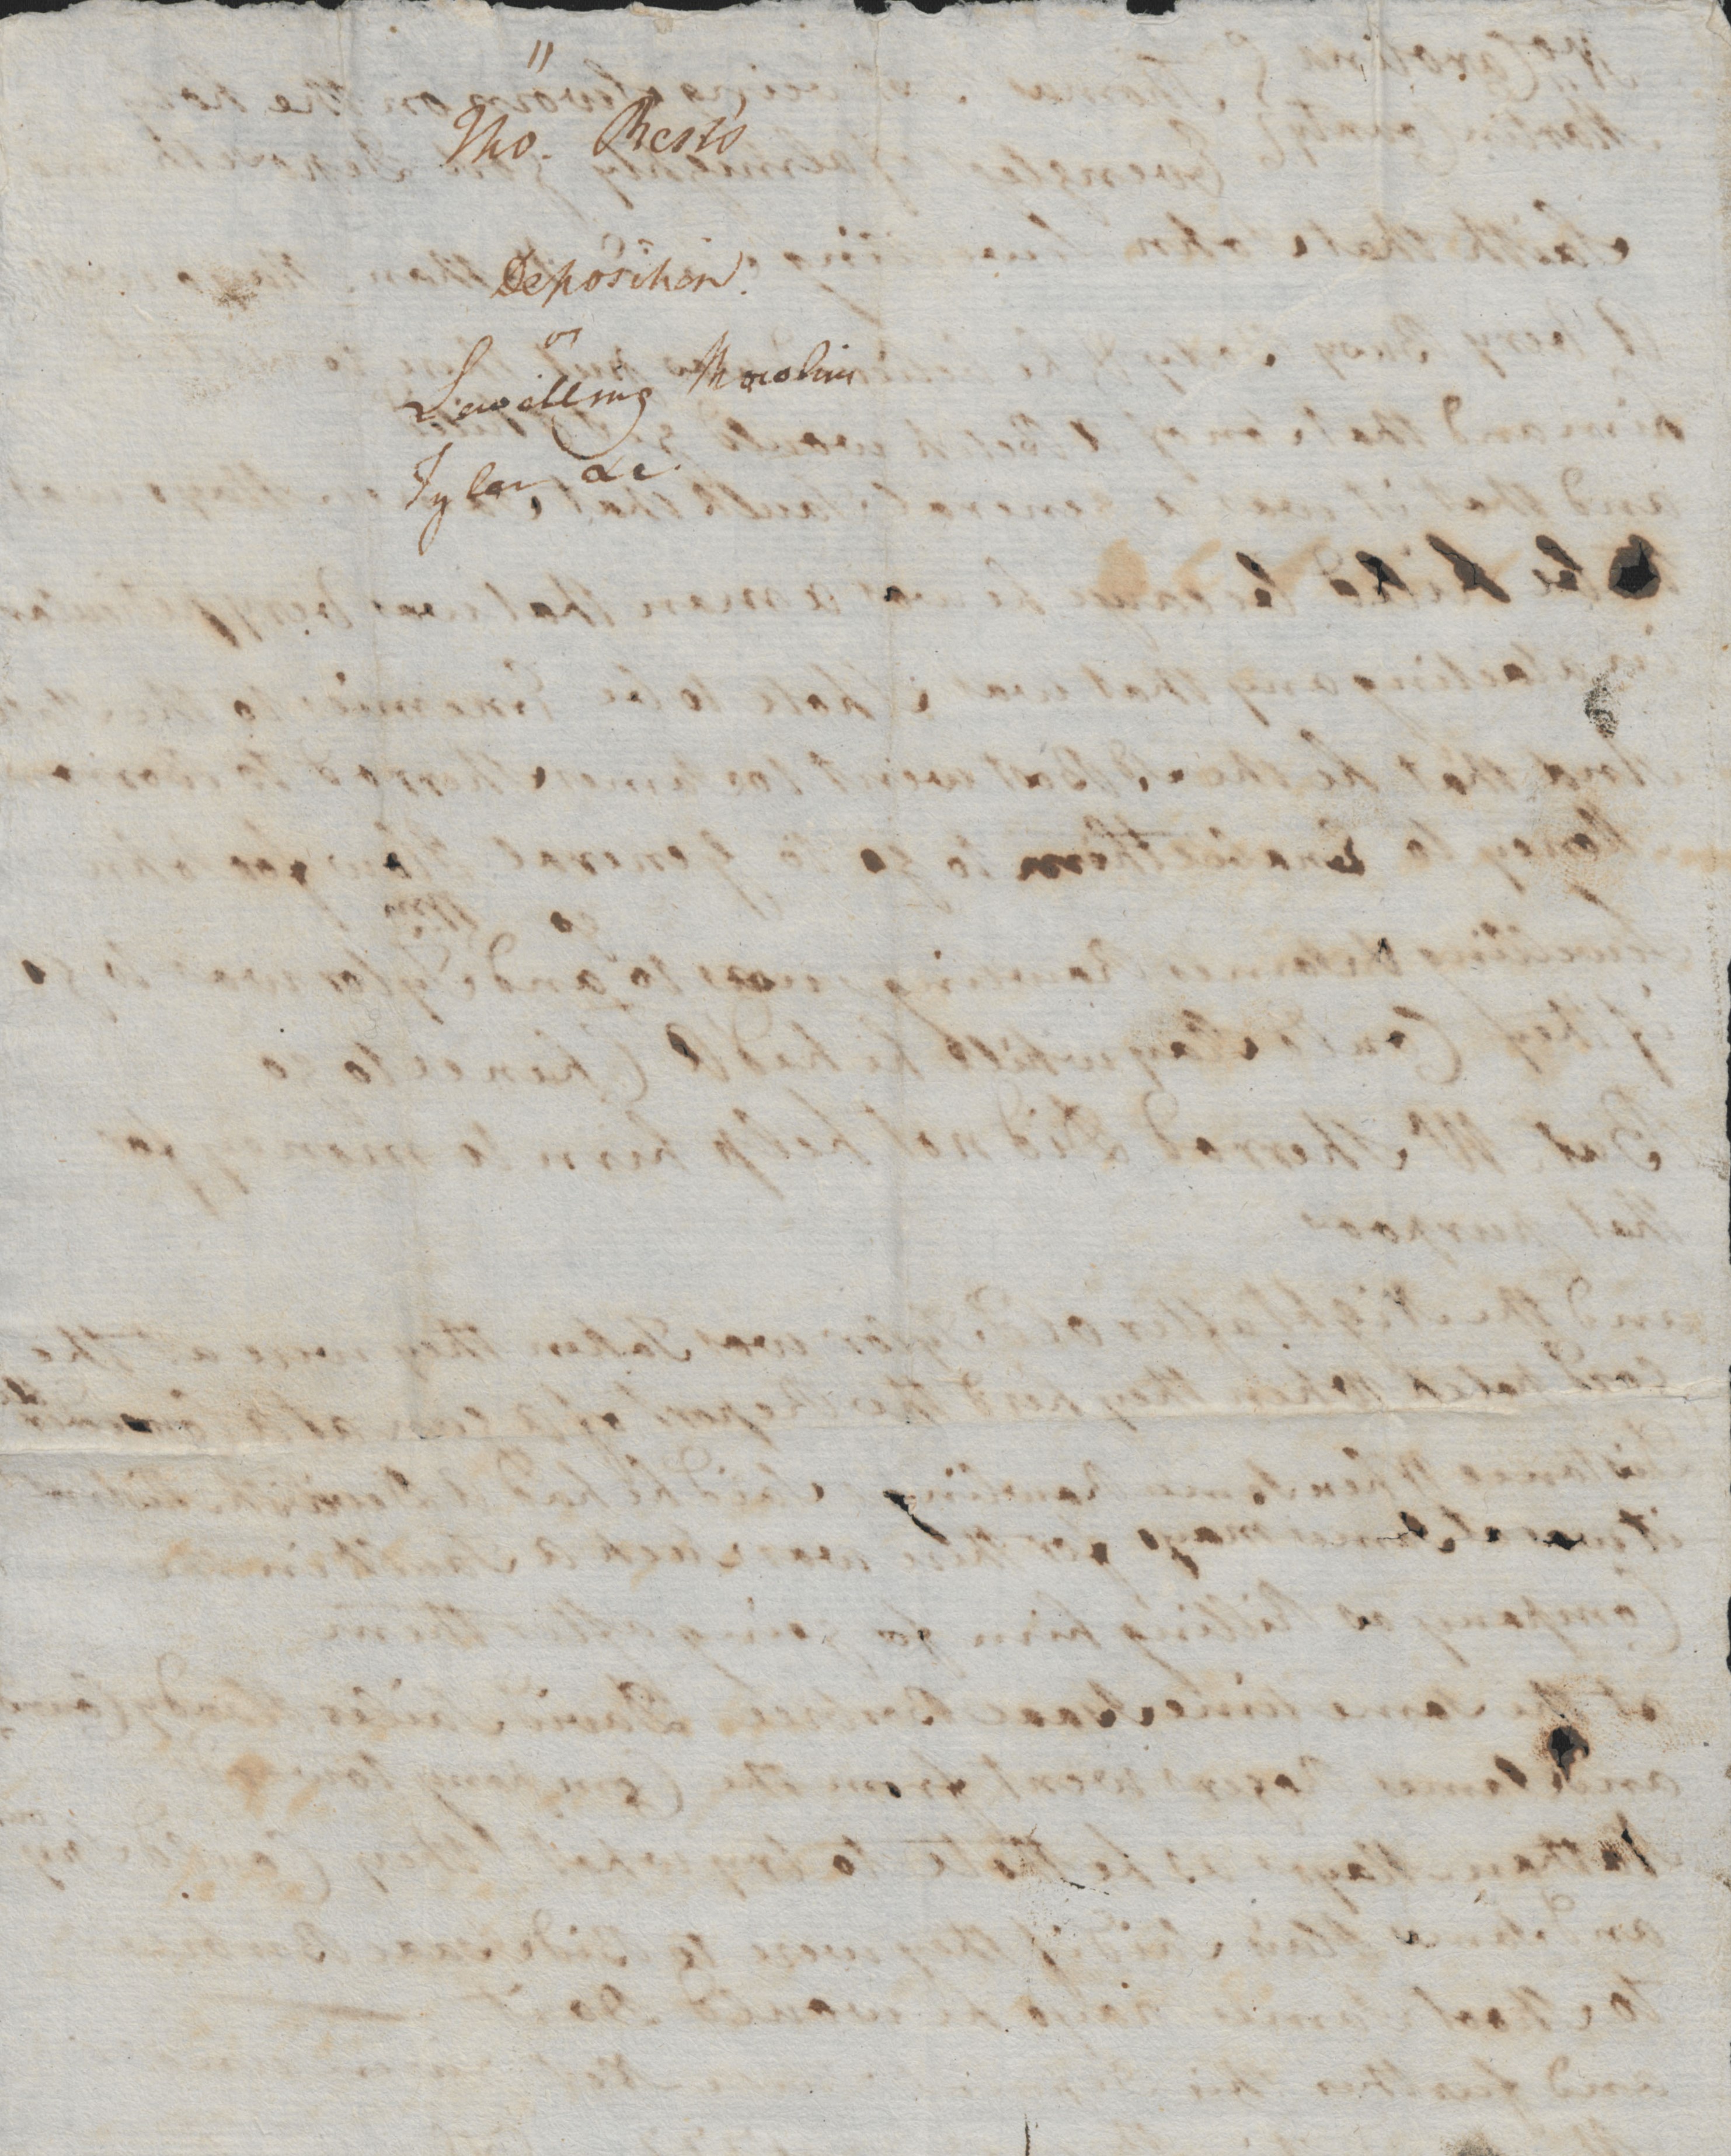 Deposition of Thomas Best, 9 September 1777, page 2